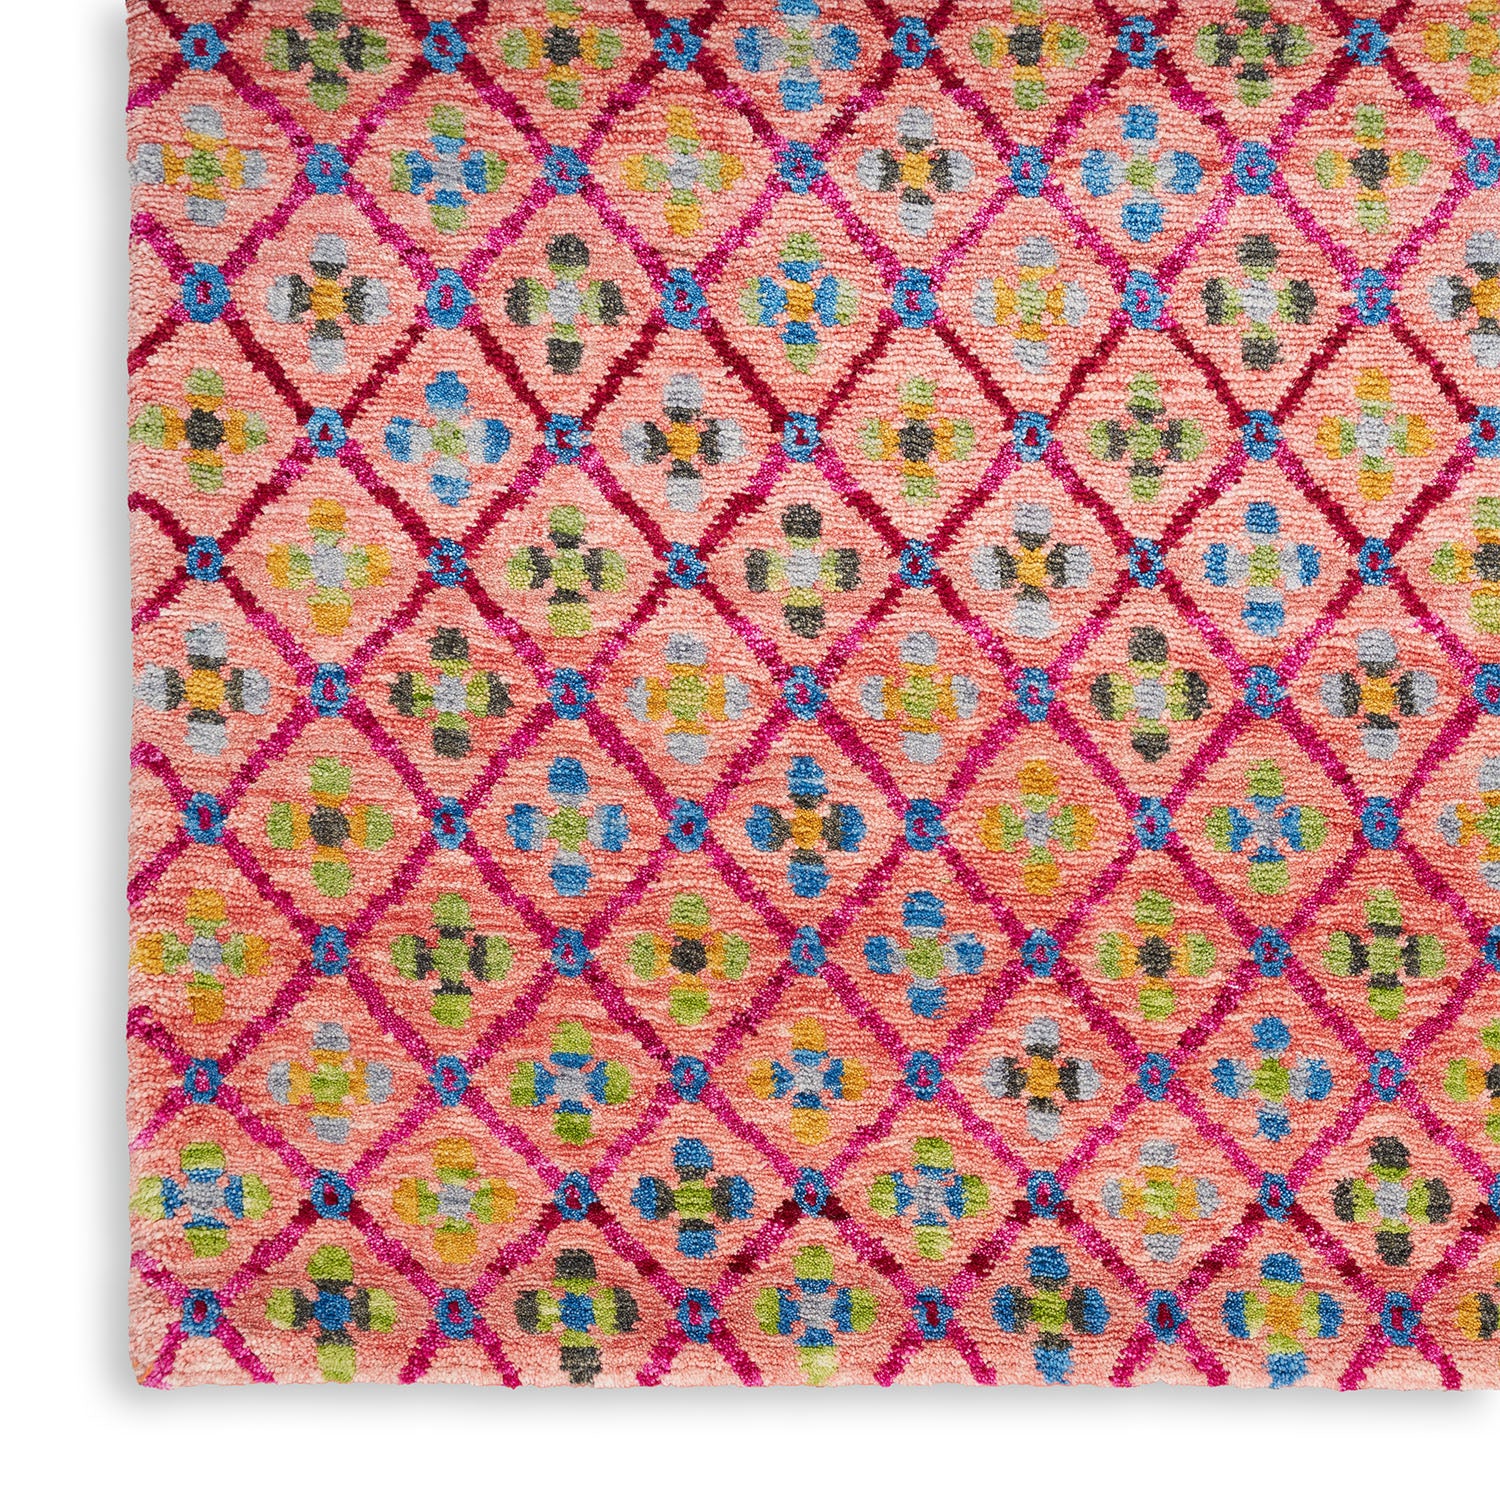 Intricate, vibrant textile featuring a diamond lattice pattern with floral motifs.